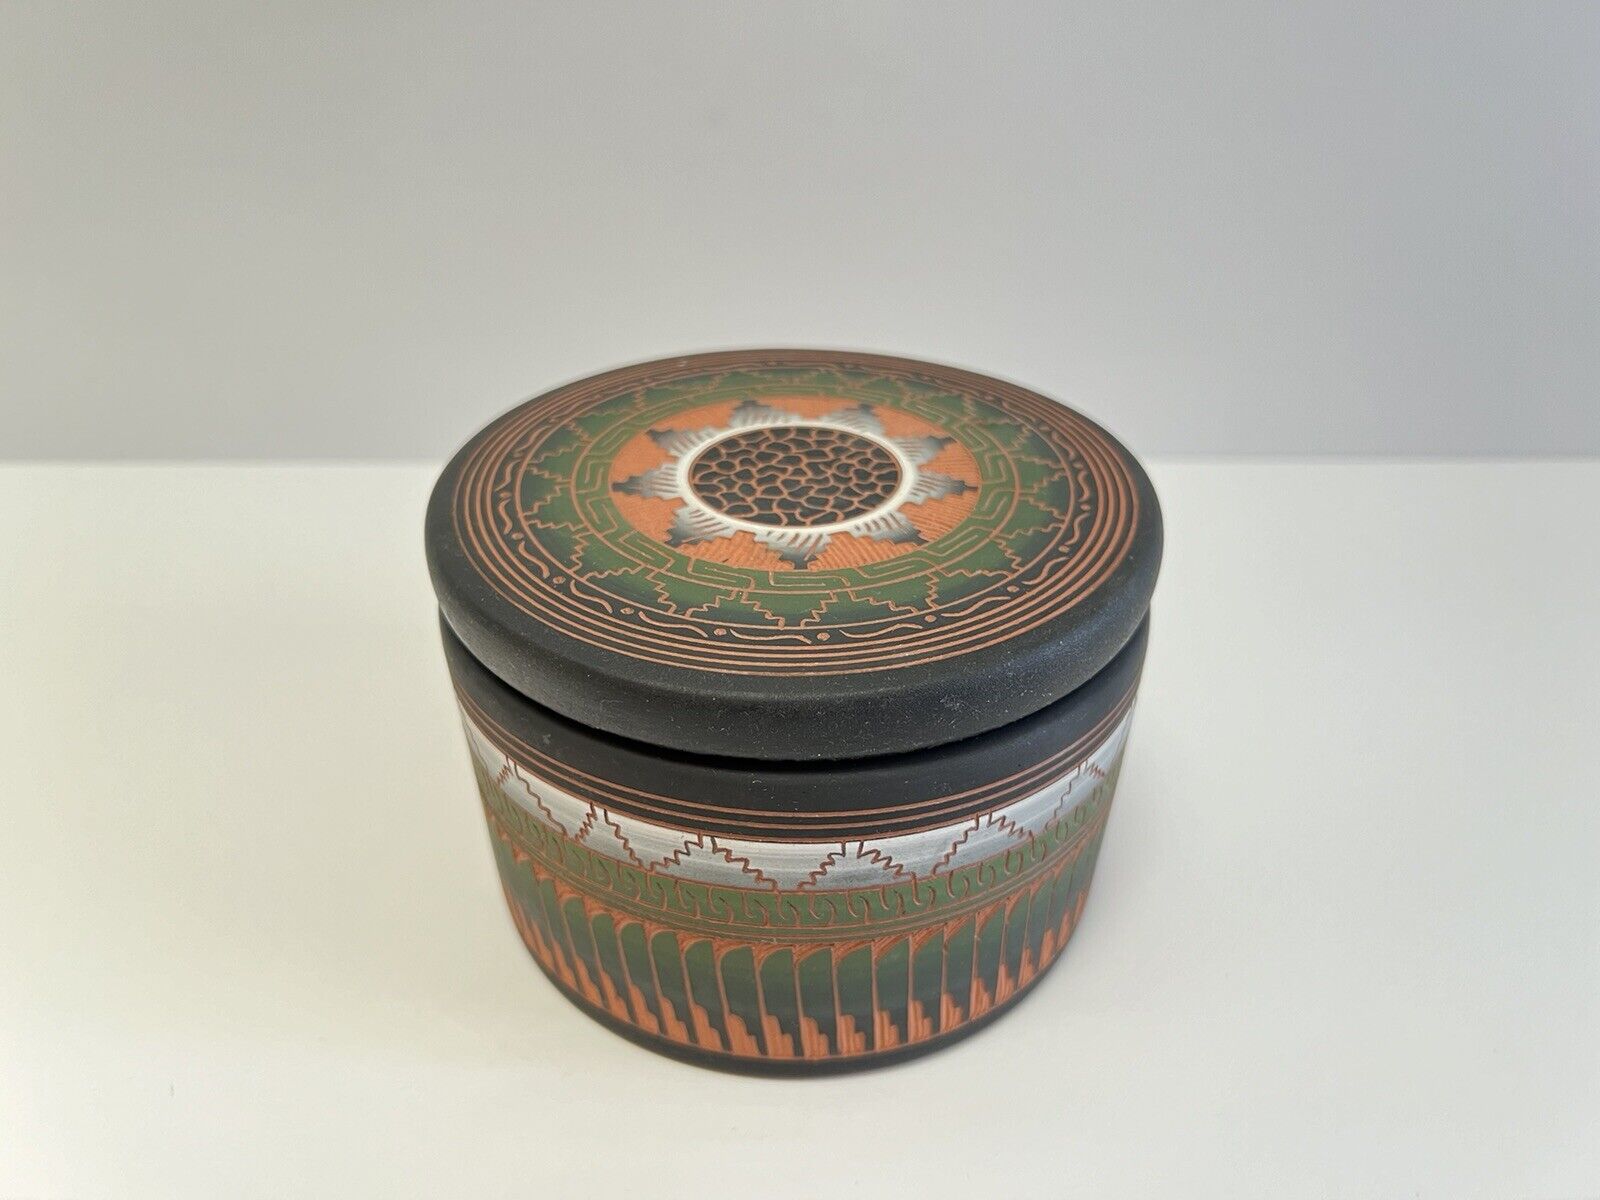 Navajo Etched Pottery box hand made by artist Hilda Whitegoat